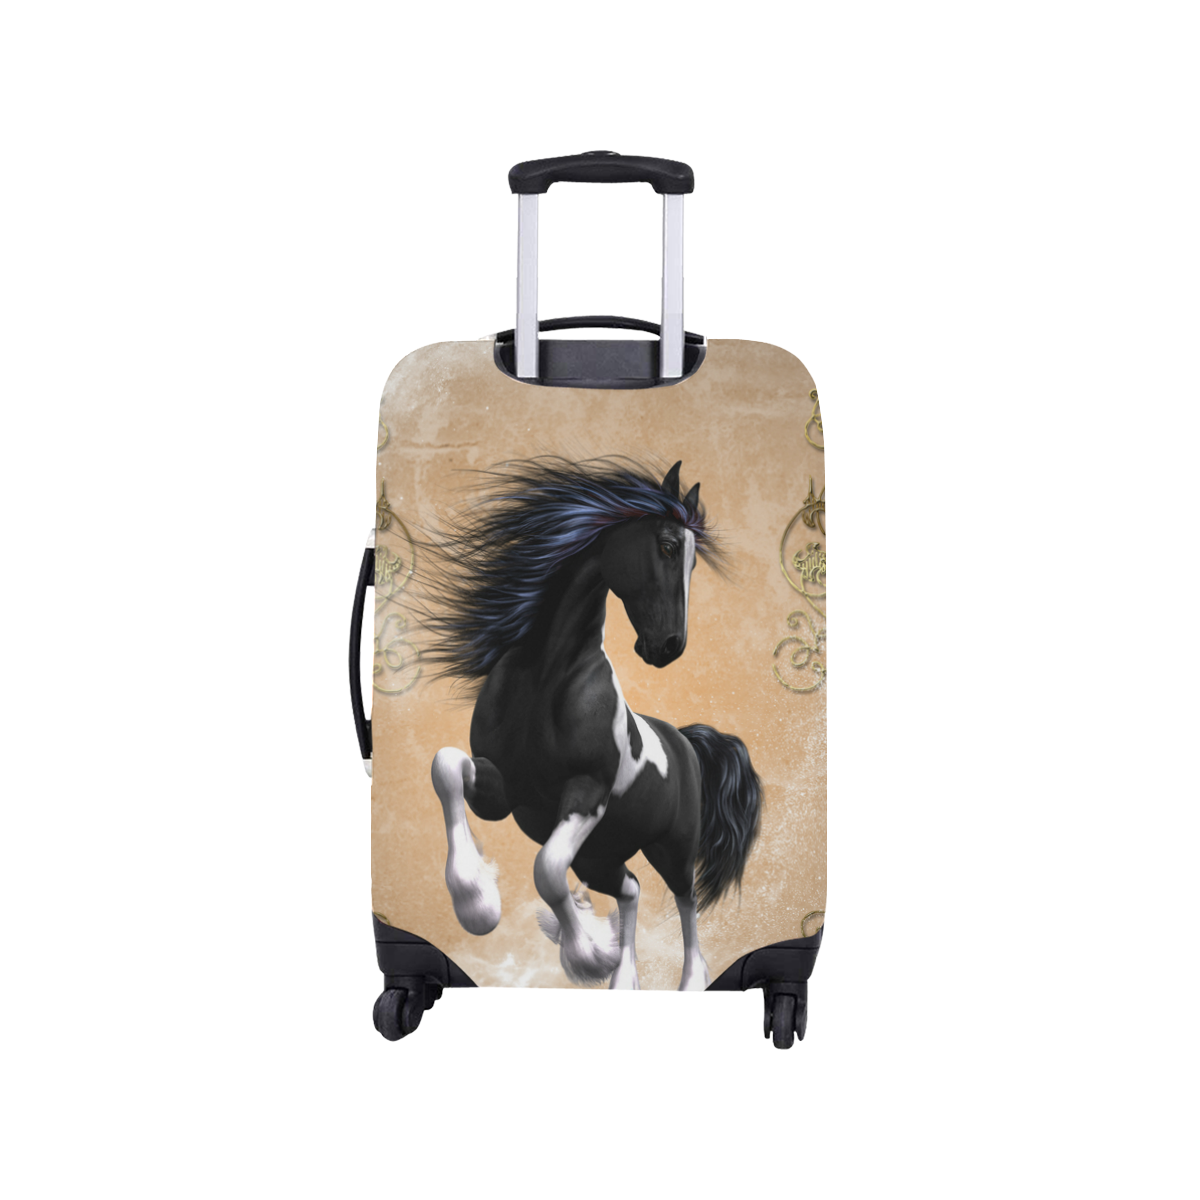 Wonderful horse Luggage Cover/Small 18"-21"